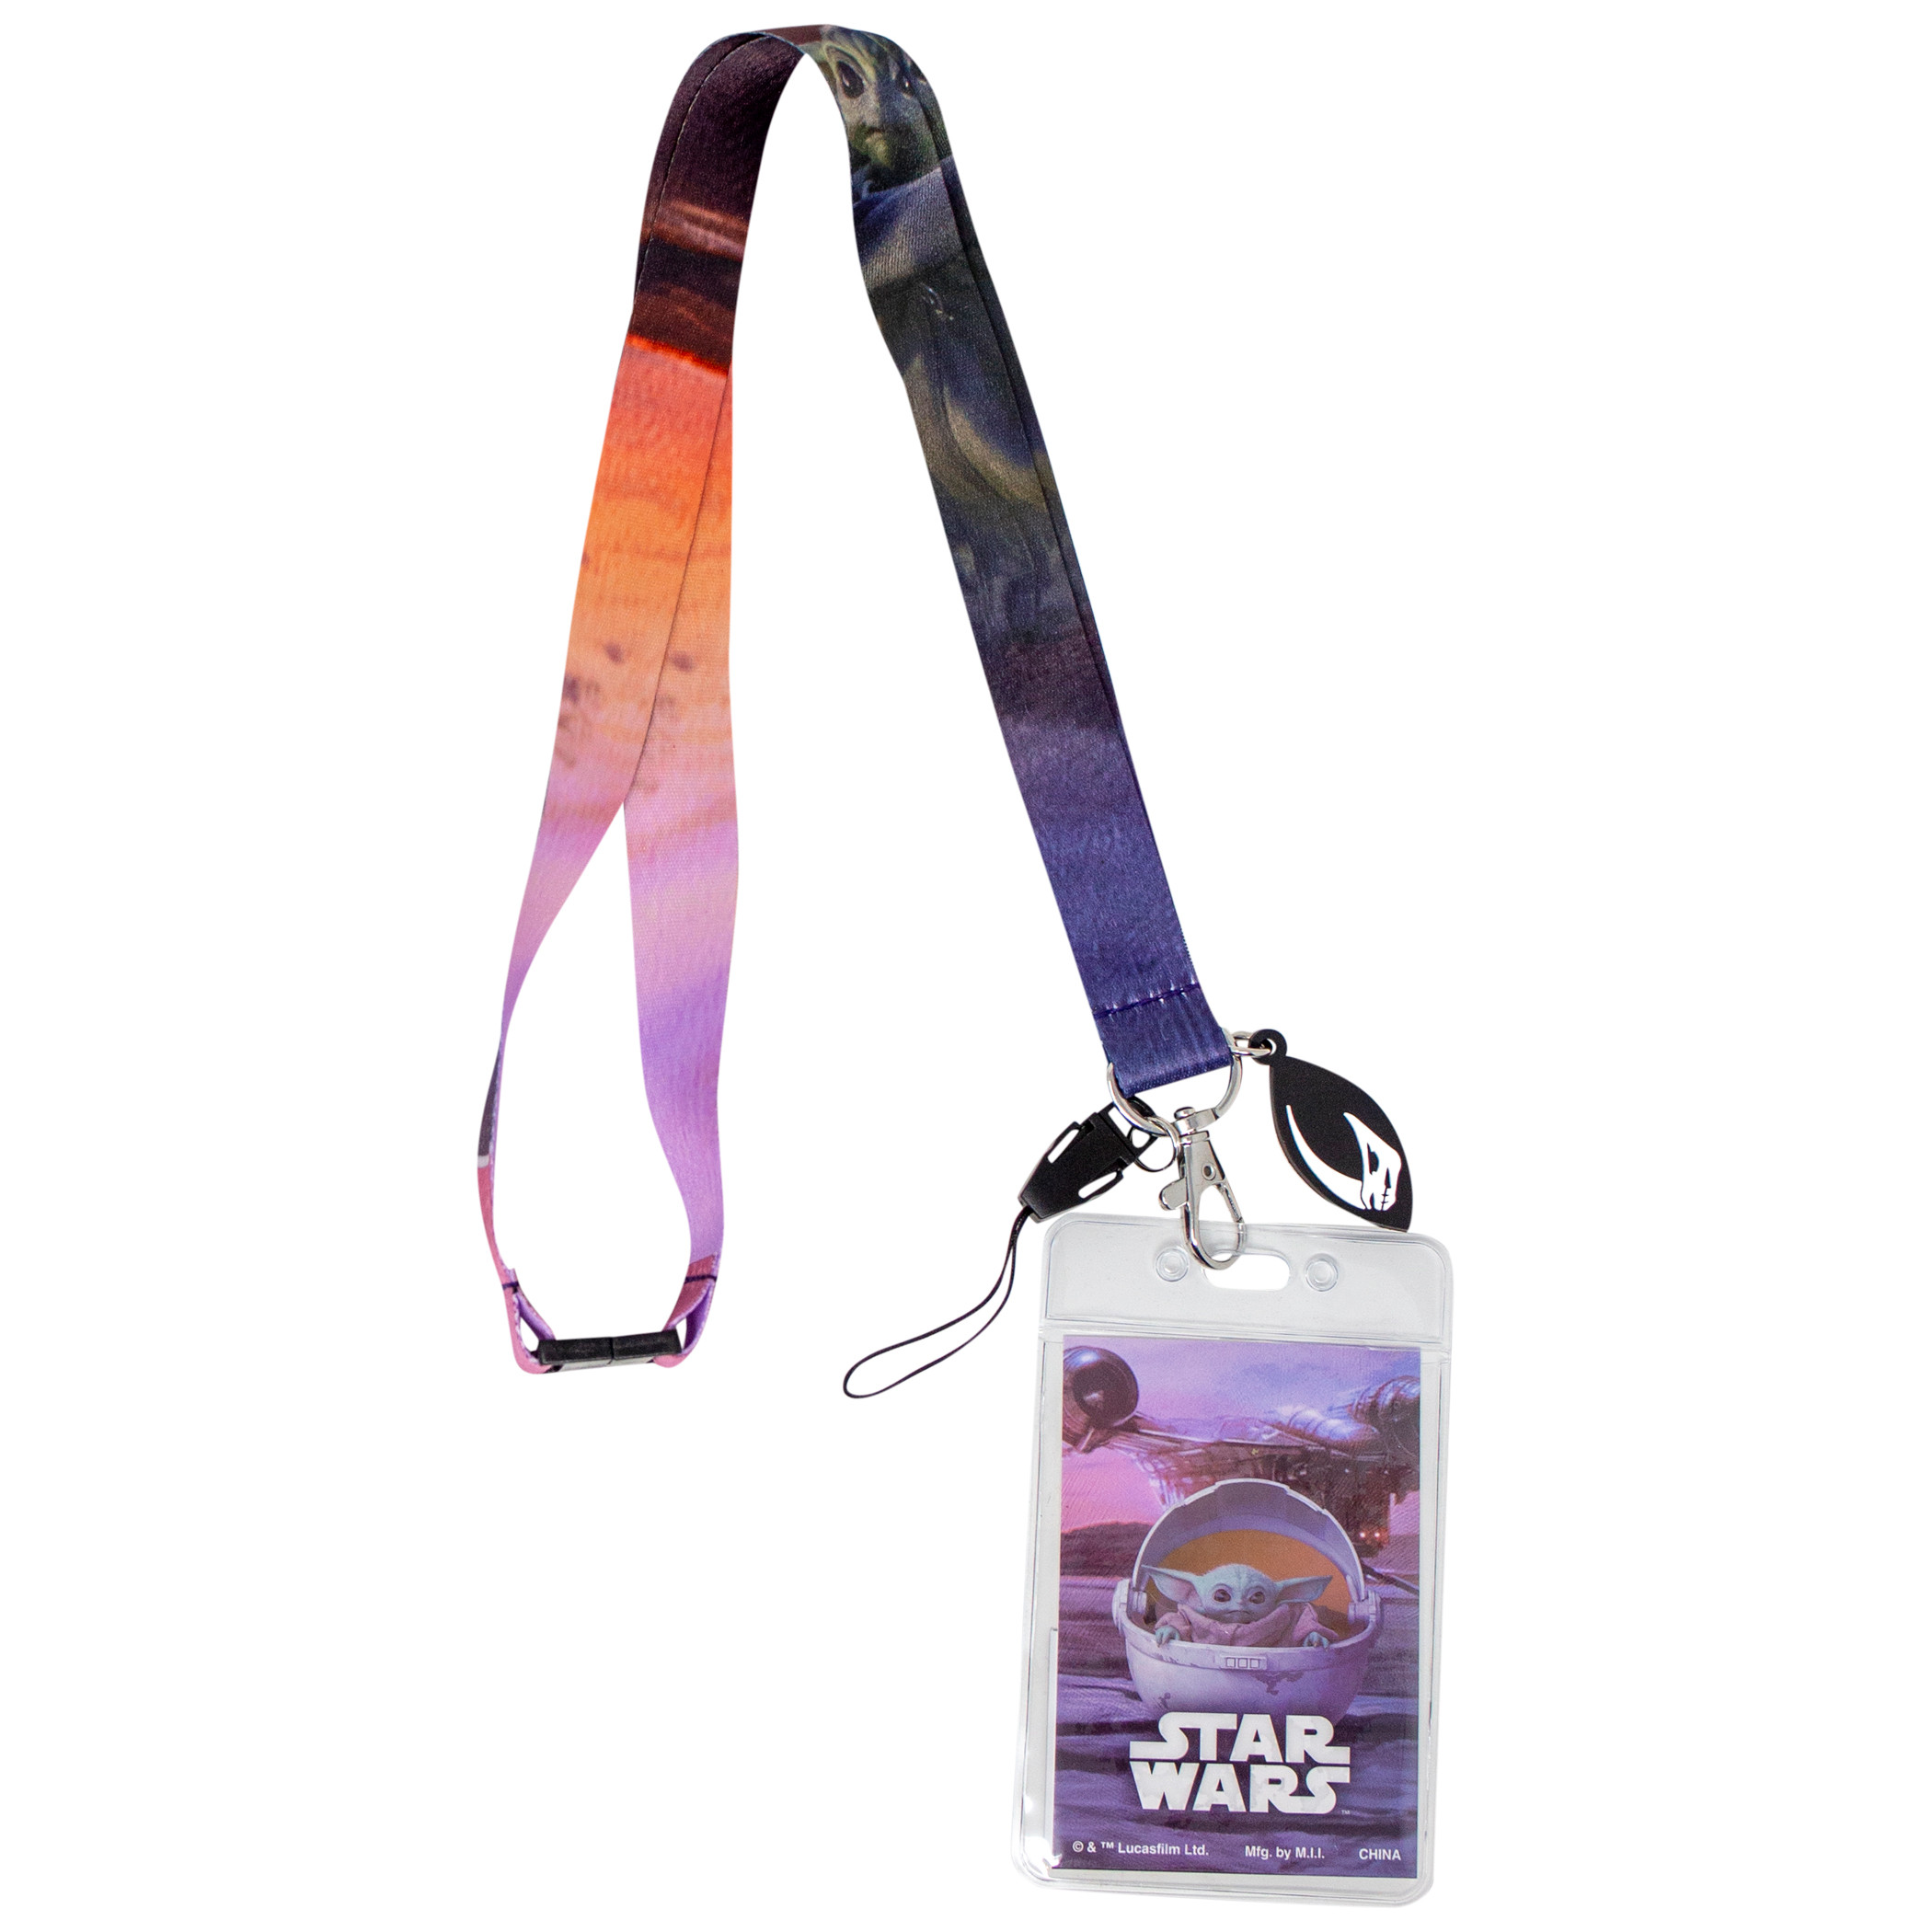 Star Wars The Child Lanyard with ID Badge Holder and Dangle